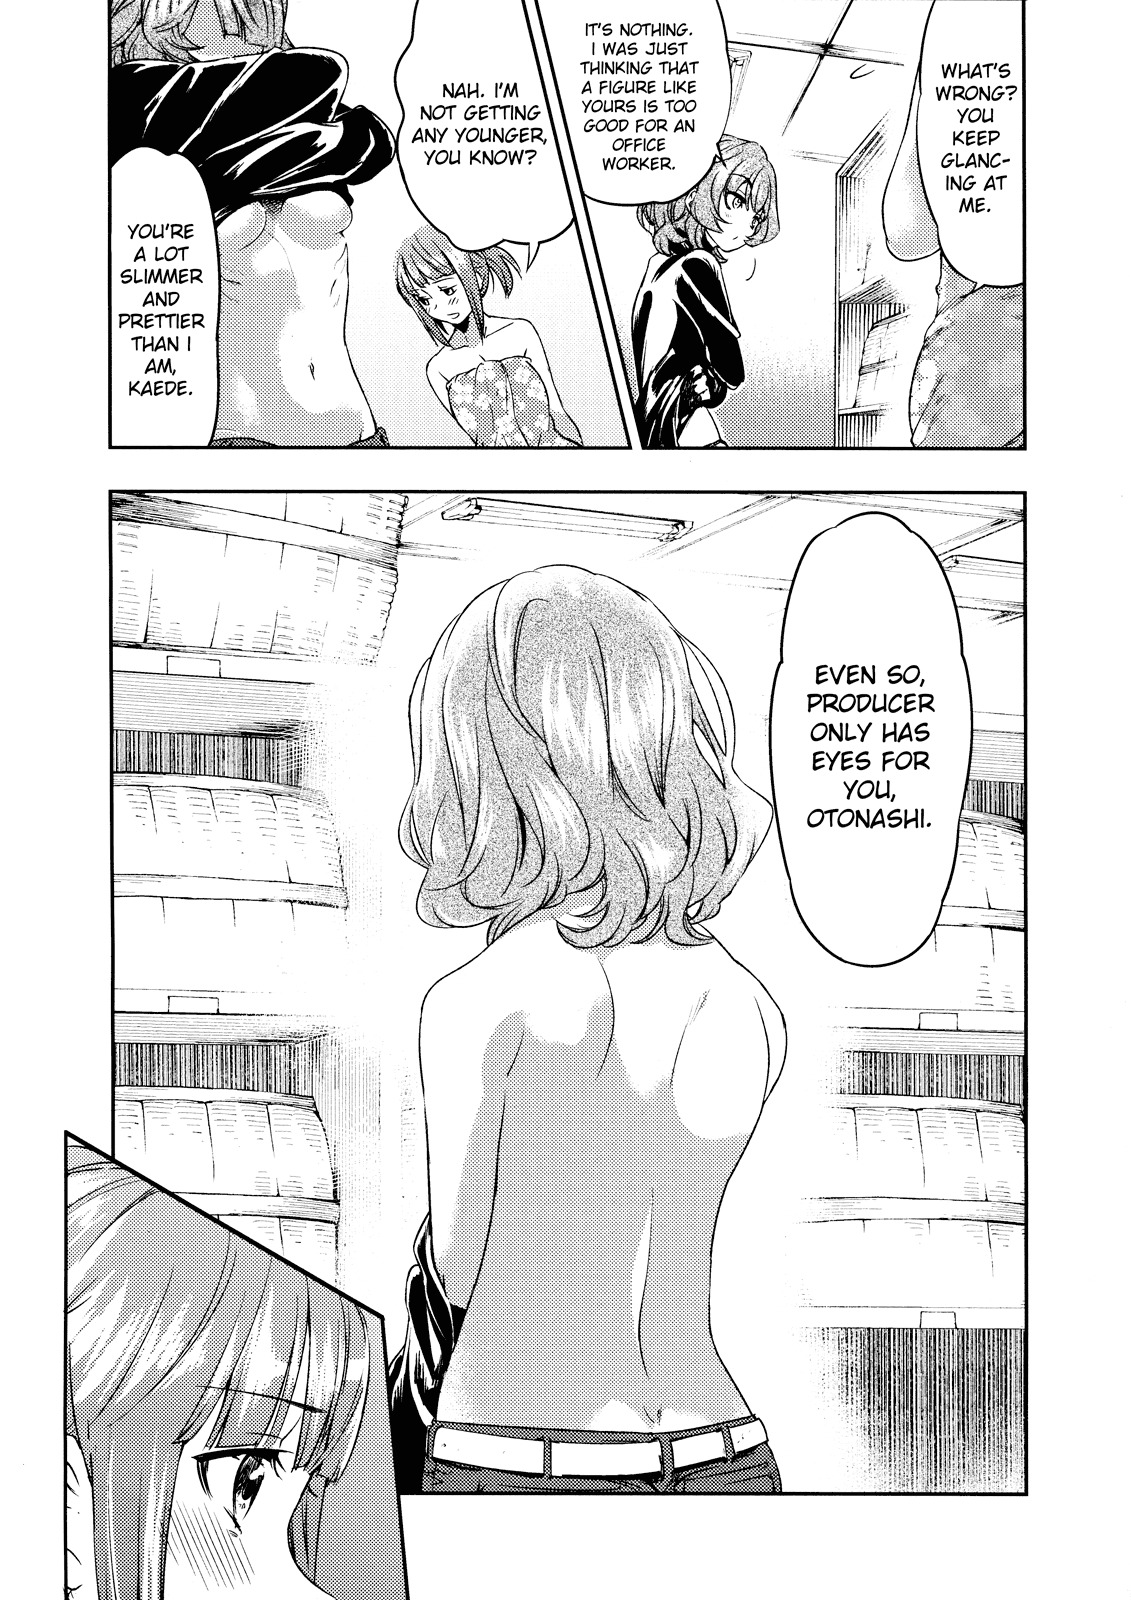 THE iDOLM@STER - canis minor (Doujinshi) Oneshot